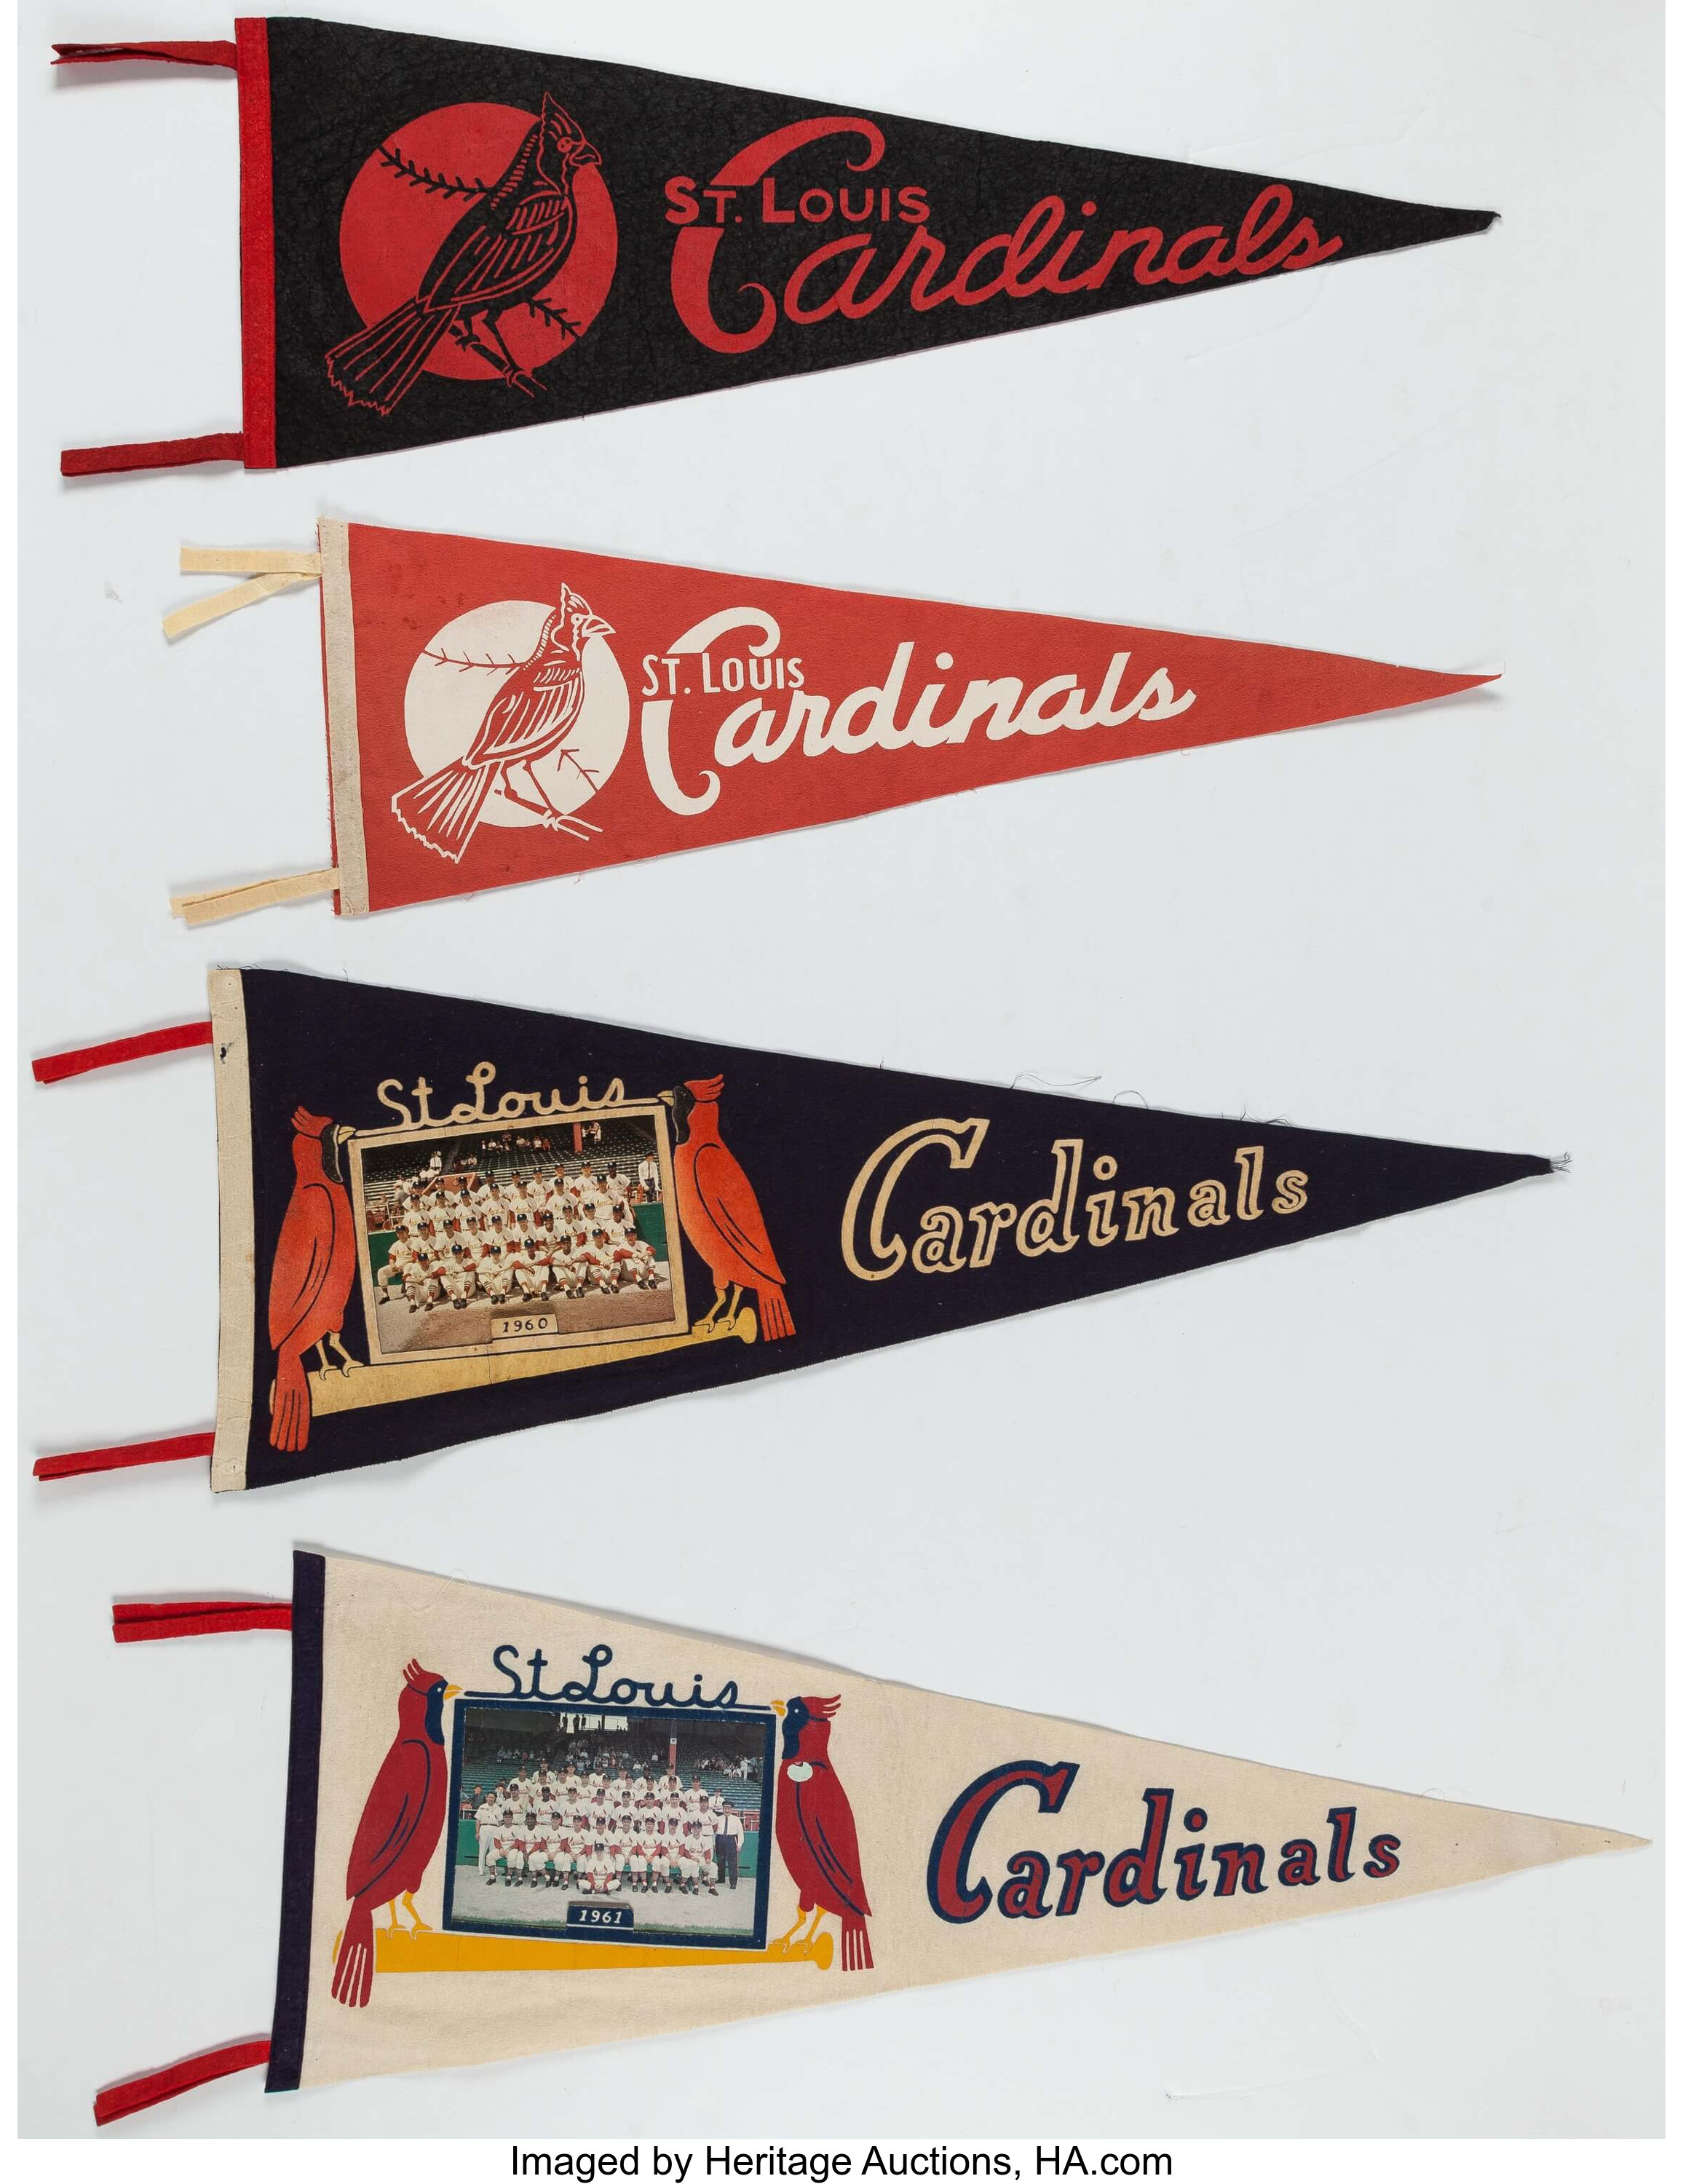 St. Louis Cardinals Heritage History Banner Pennant